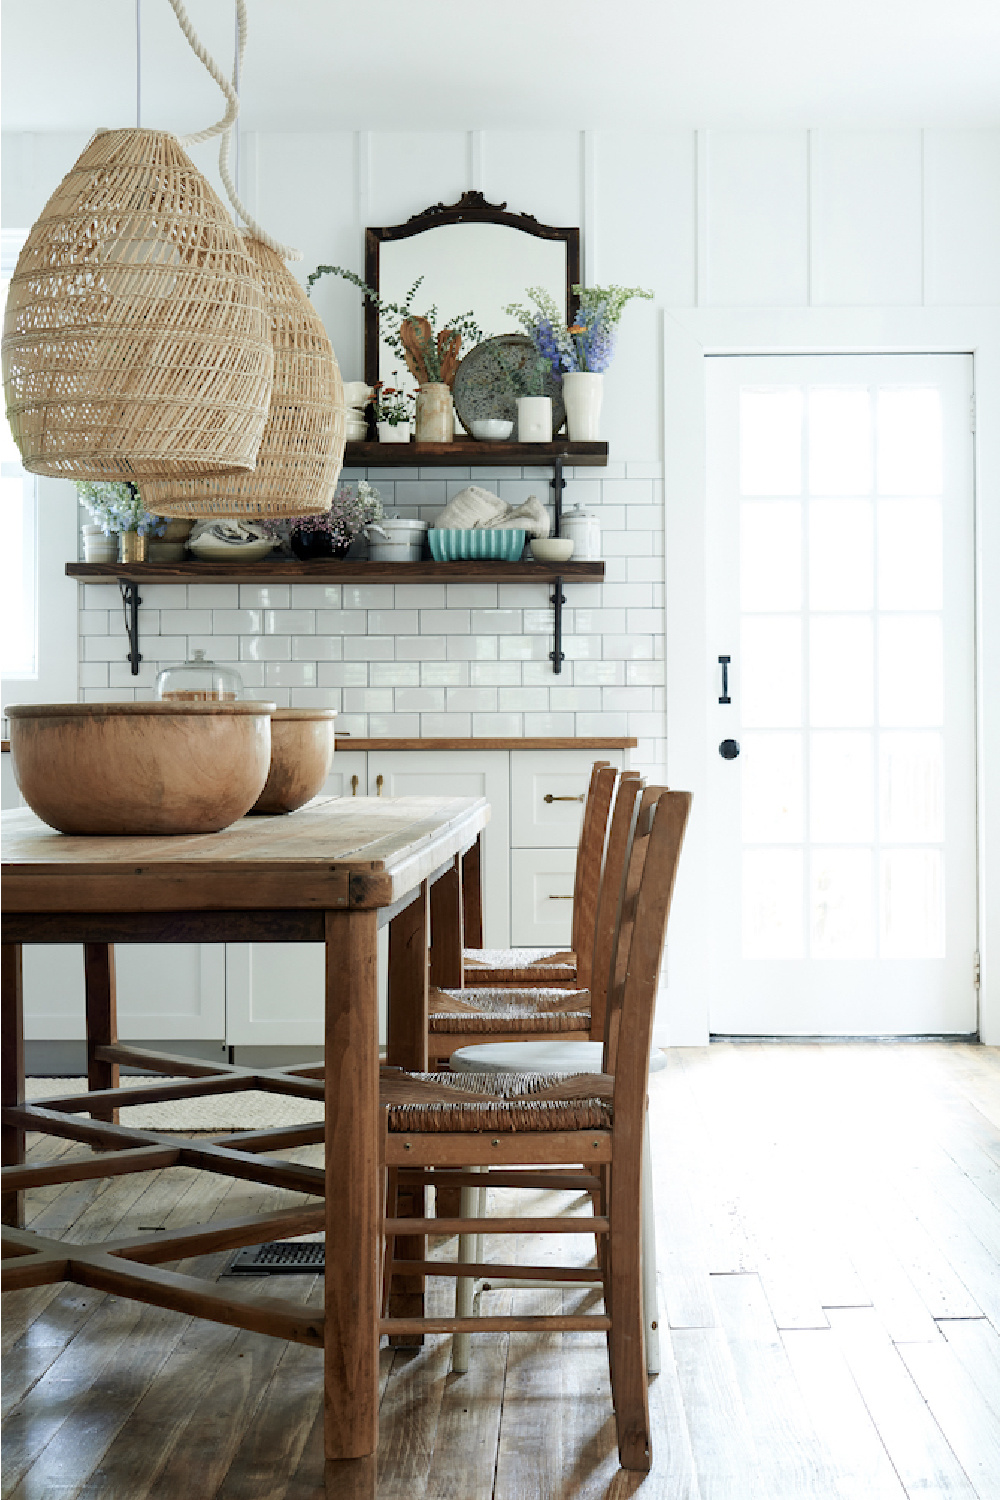 A glorious modern rustic farmhouse kitchen by Leanne Ford for the Faraci family on Restored by the Fords. #restoredbythefords #leanneford #interiordesign #farmhousekitchen #modernfarmhouse #kitchendesign